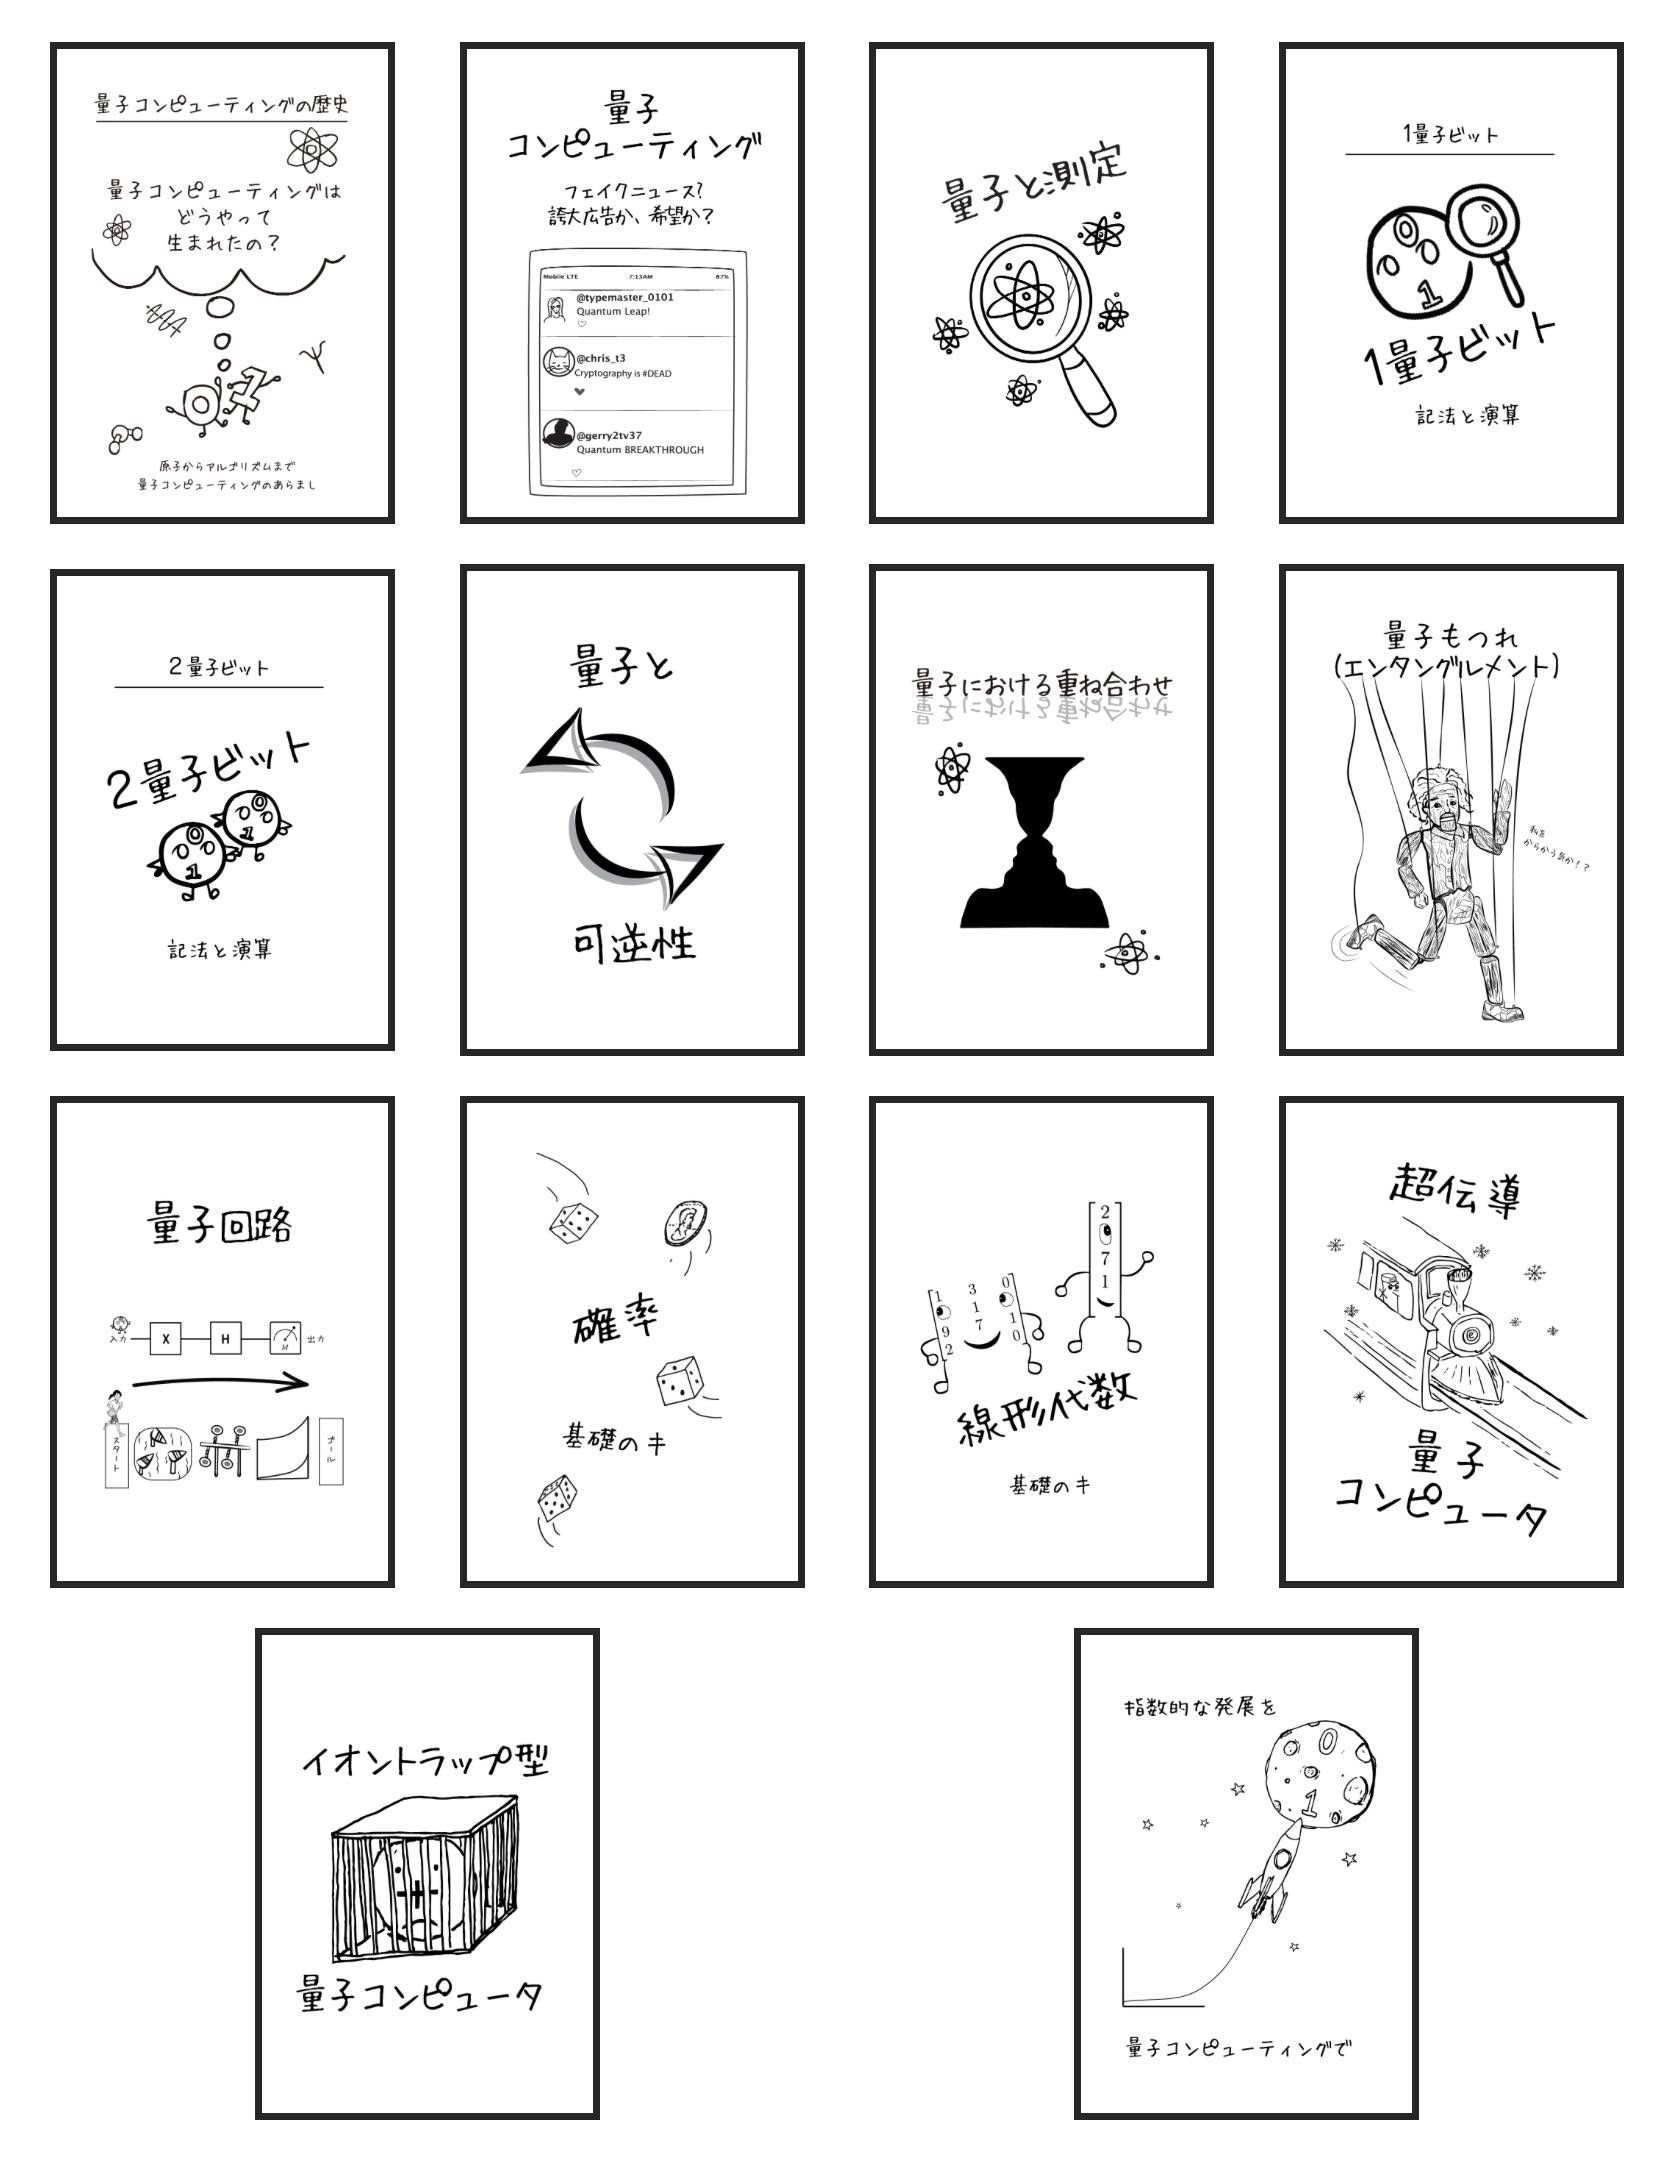 QCSC made a Japanese version of Zines opened by EPiQC!